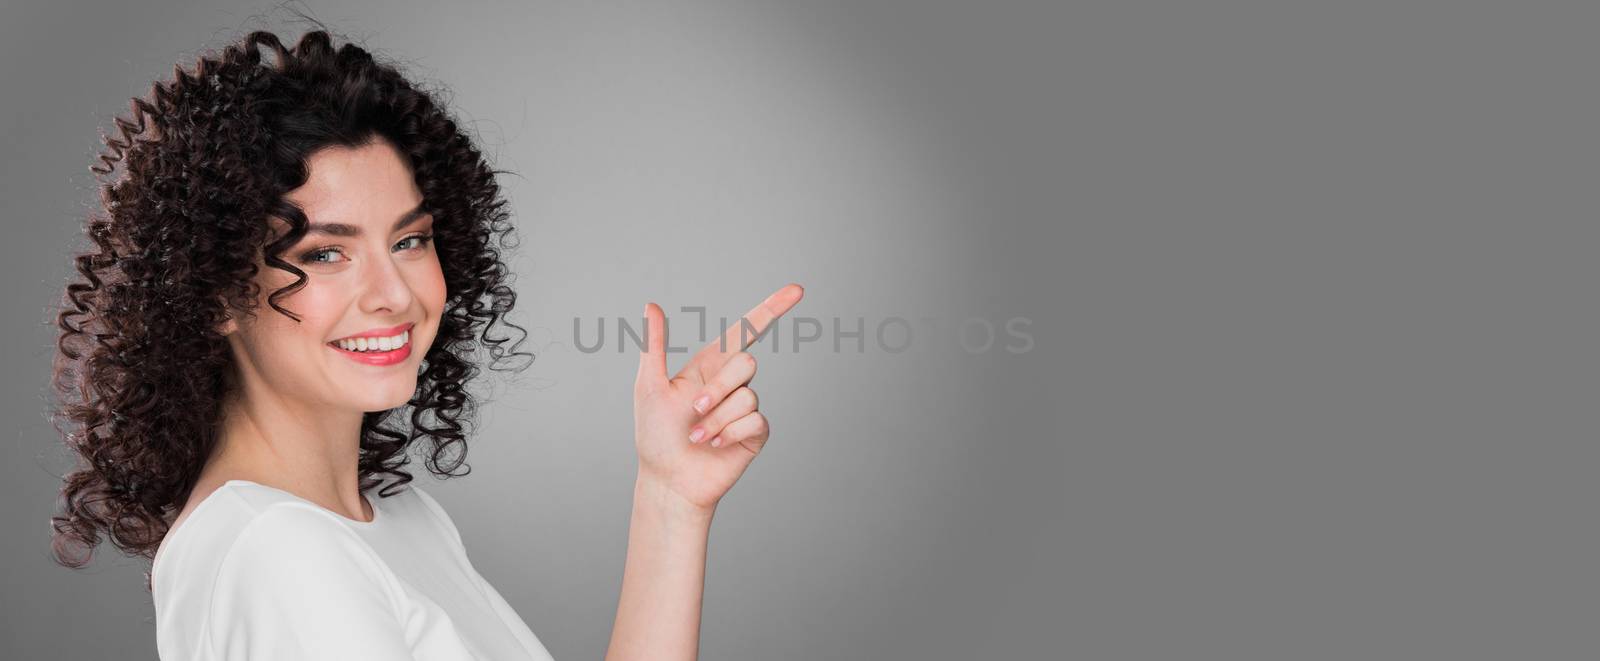 Portrait of amazing beautiful smiling woman with curly hair on gray background pointing at copy space